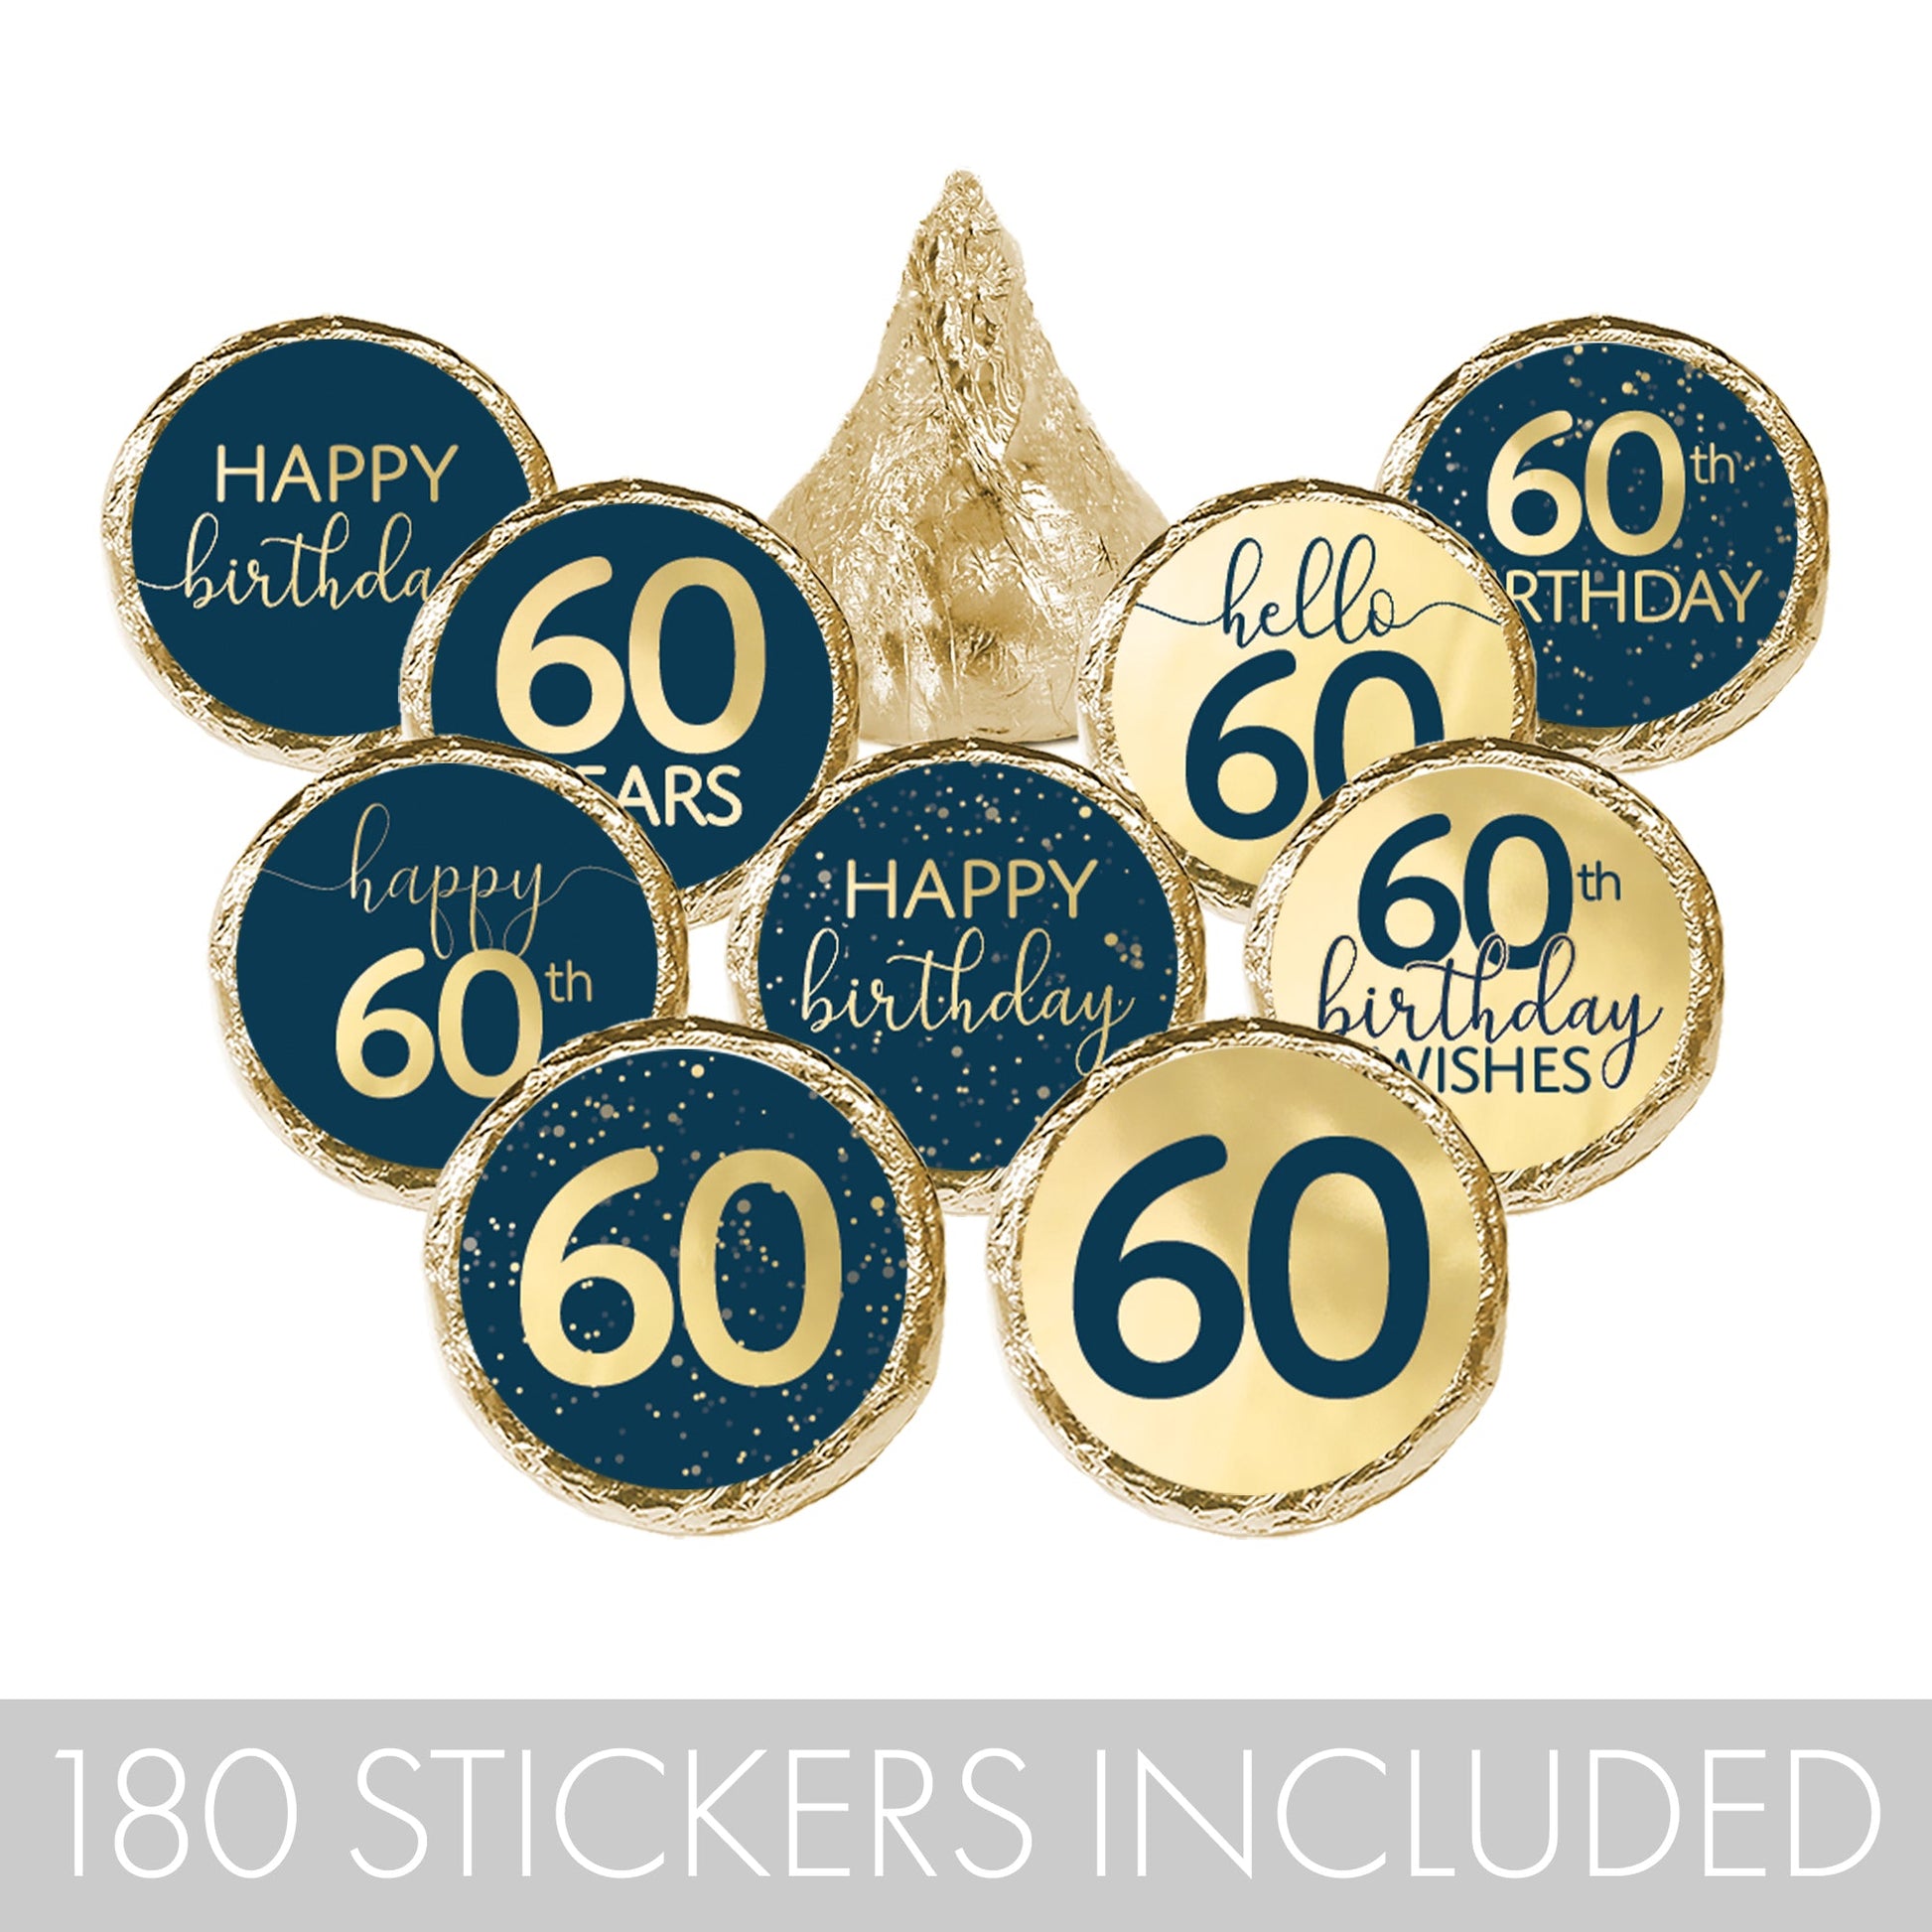 happy 60th Hersheys Kisses stickers with a navy blue and gold foil design